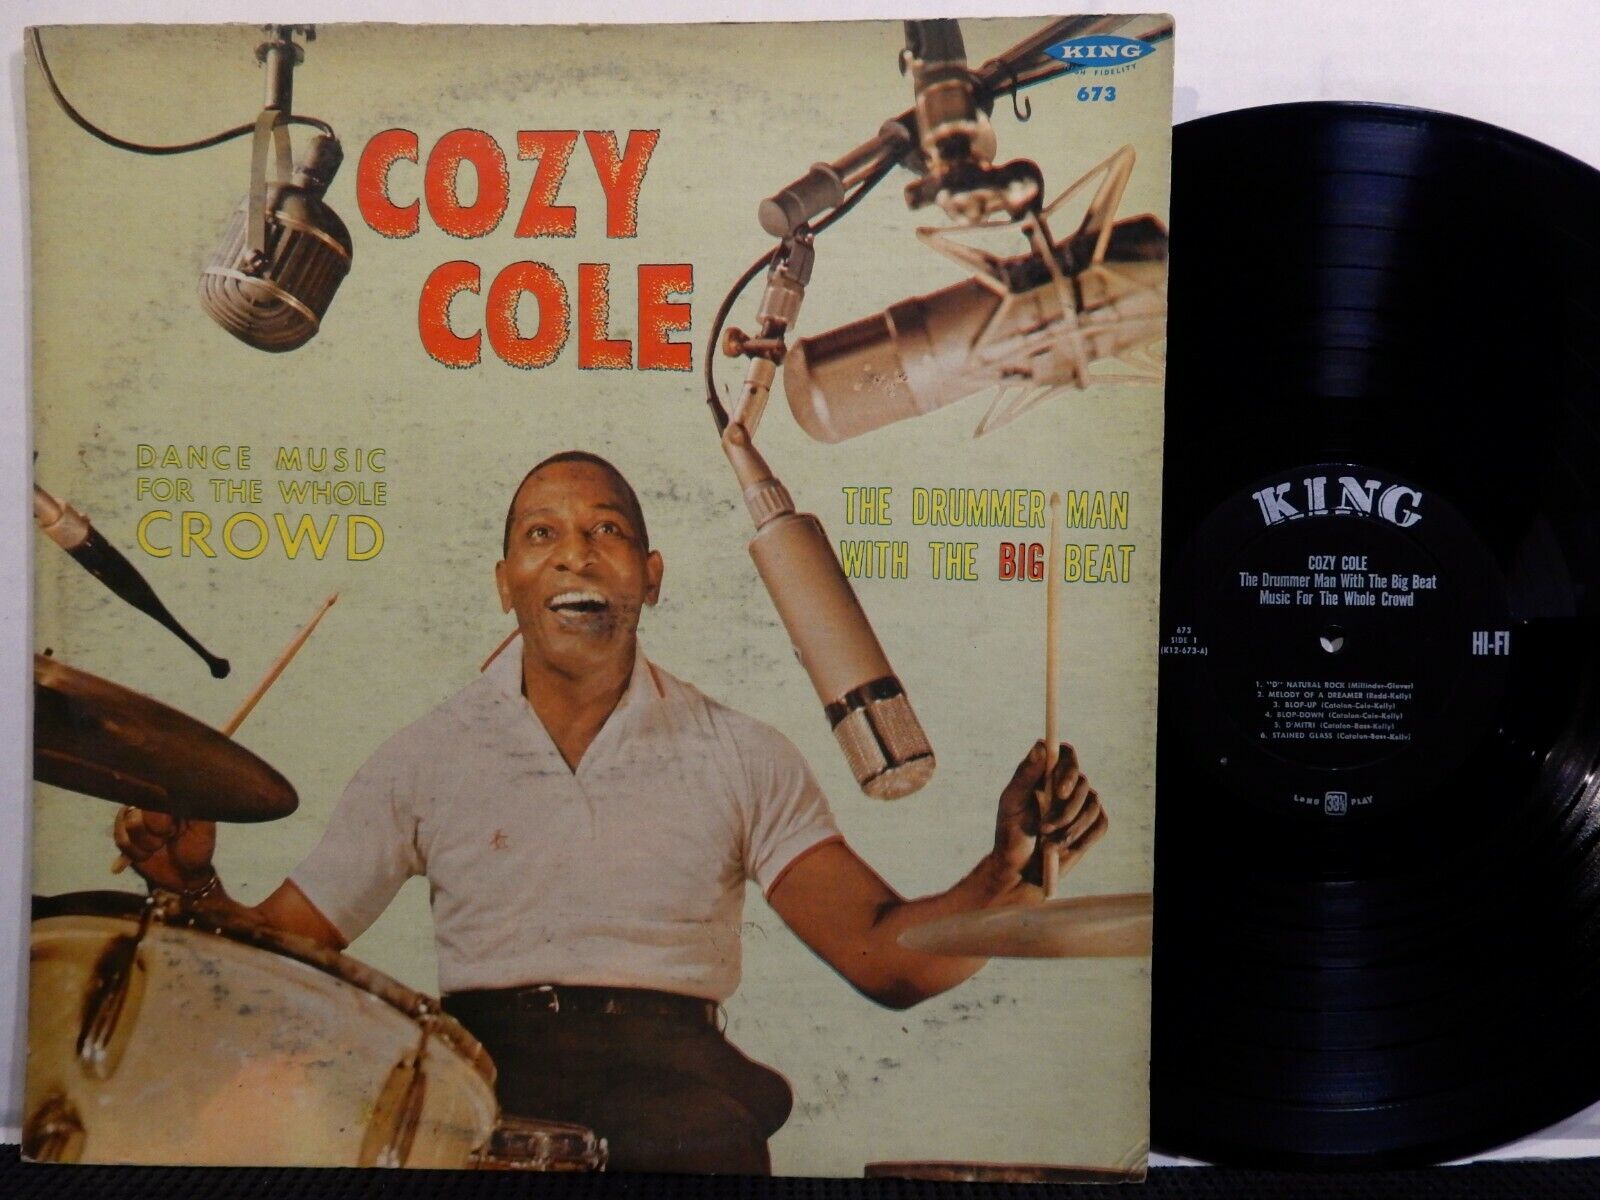 COZY COLE The Drummer Man With The Big Beat LP KING 673 MONO DG 1959 Jazz